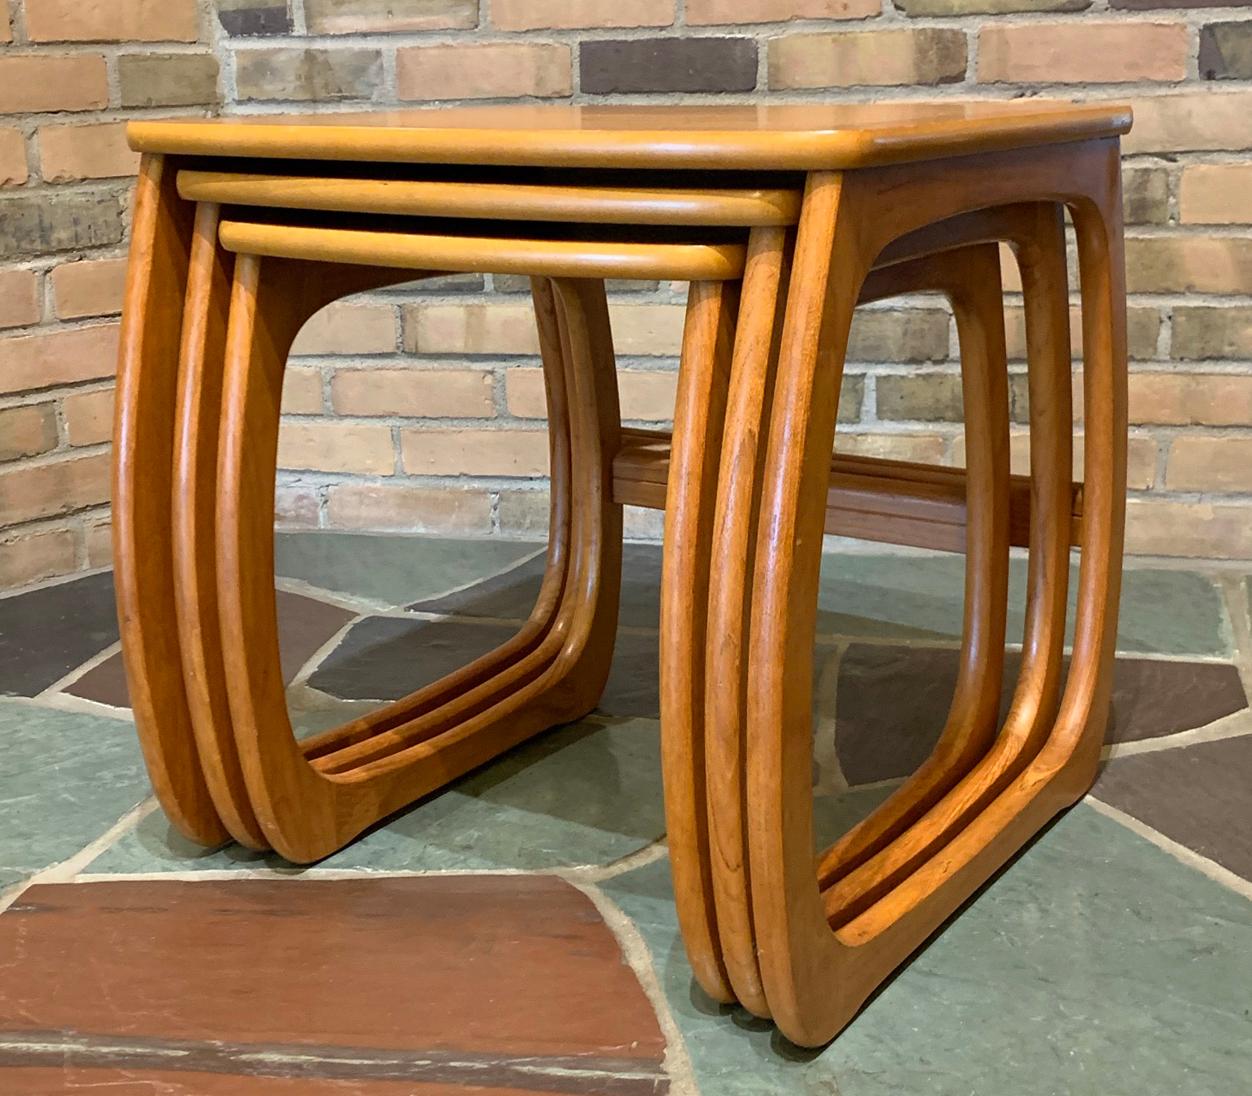 For your consideration is a phenomenal set of nesting tables, including three side tables that fit into one another, by Nathan Mastercraftsman, circa the 1960s. In excellent vintage condition. The largest table measures 21